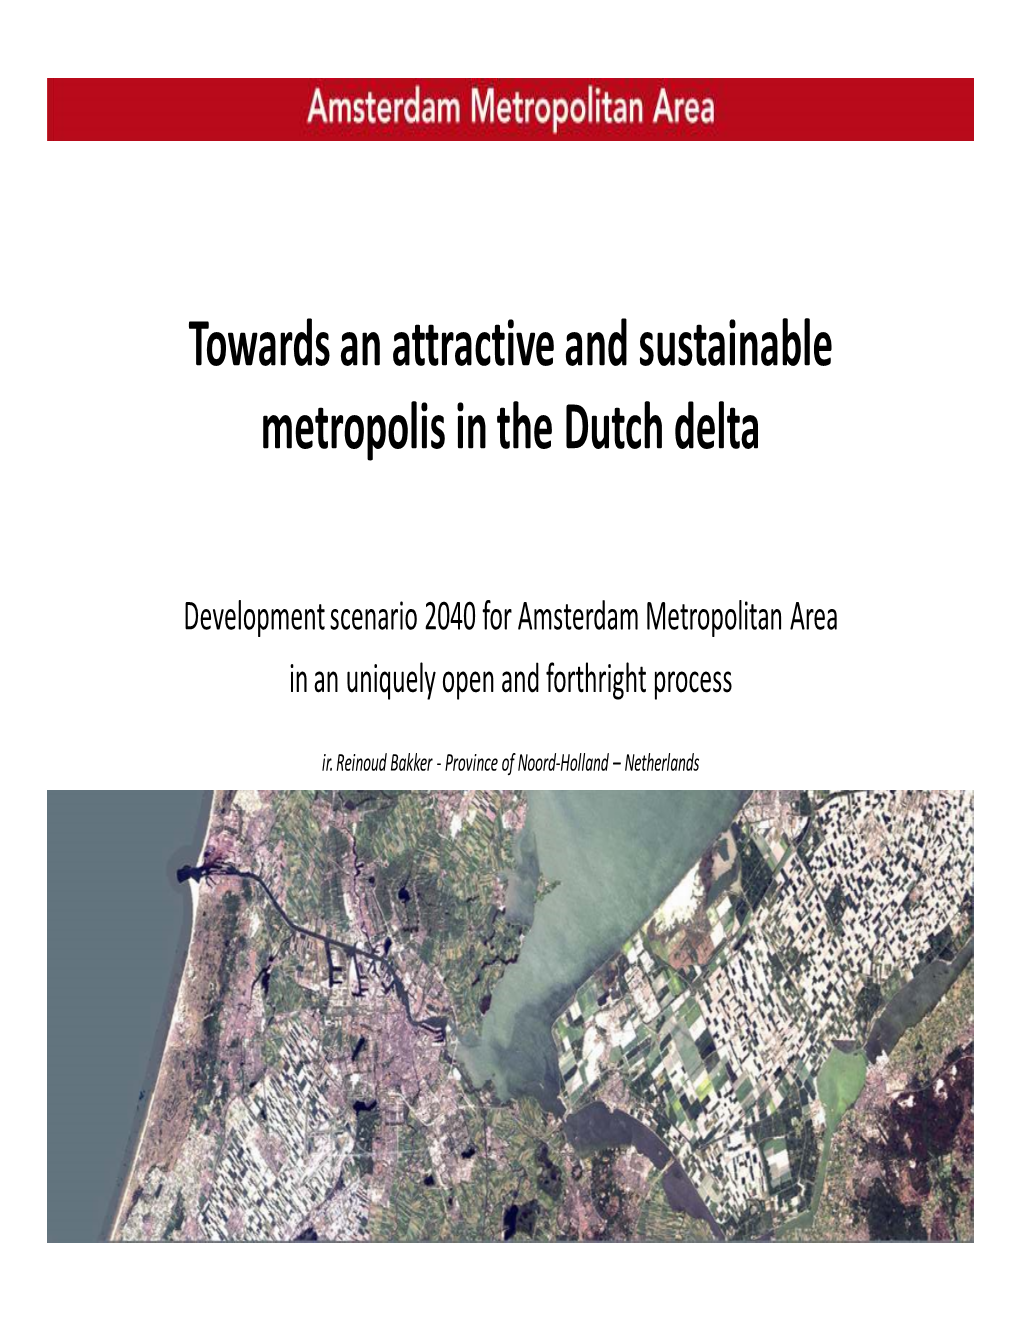 Towards an Attractive and Sustainable Metropolis in the Dutch Delta